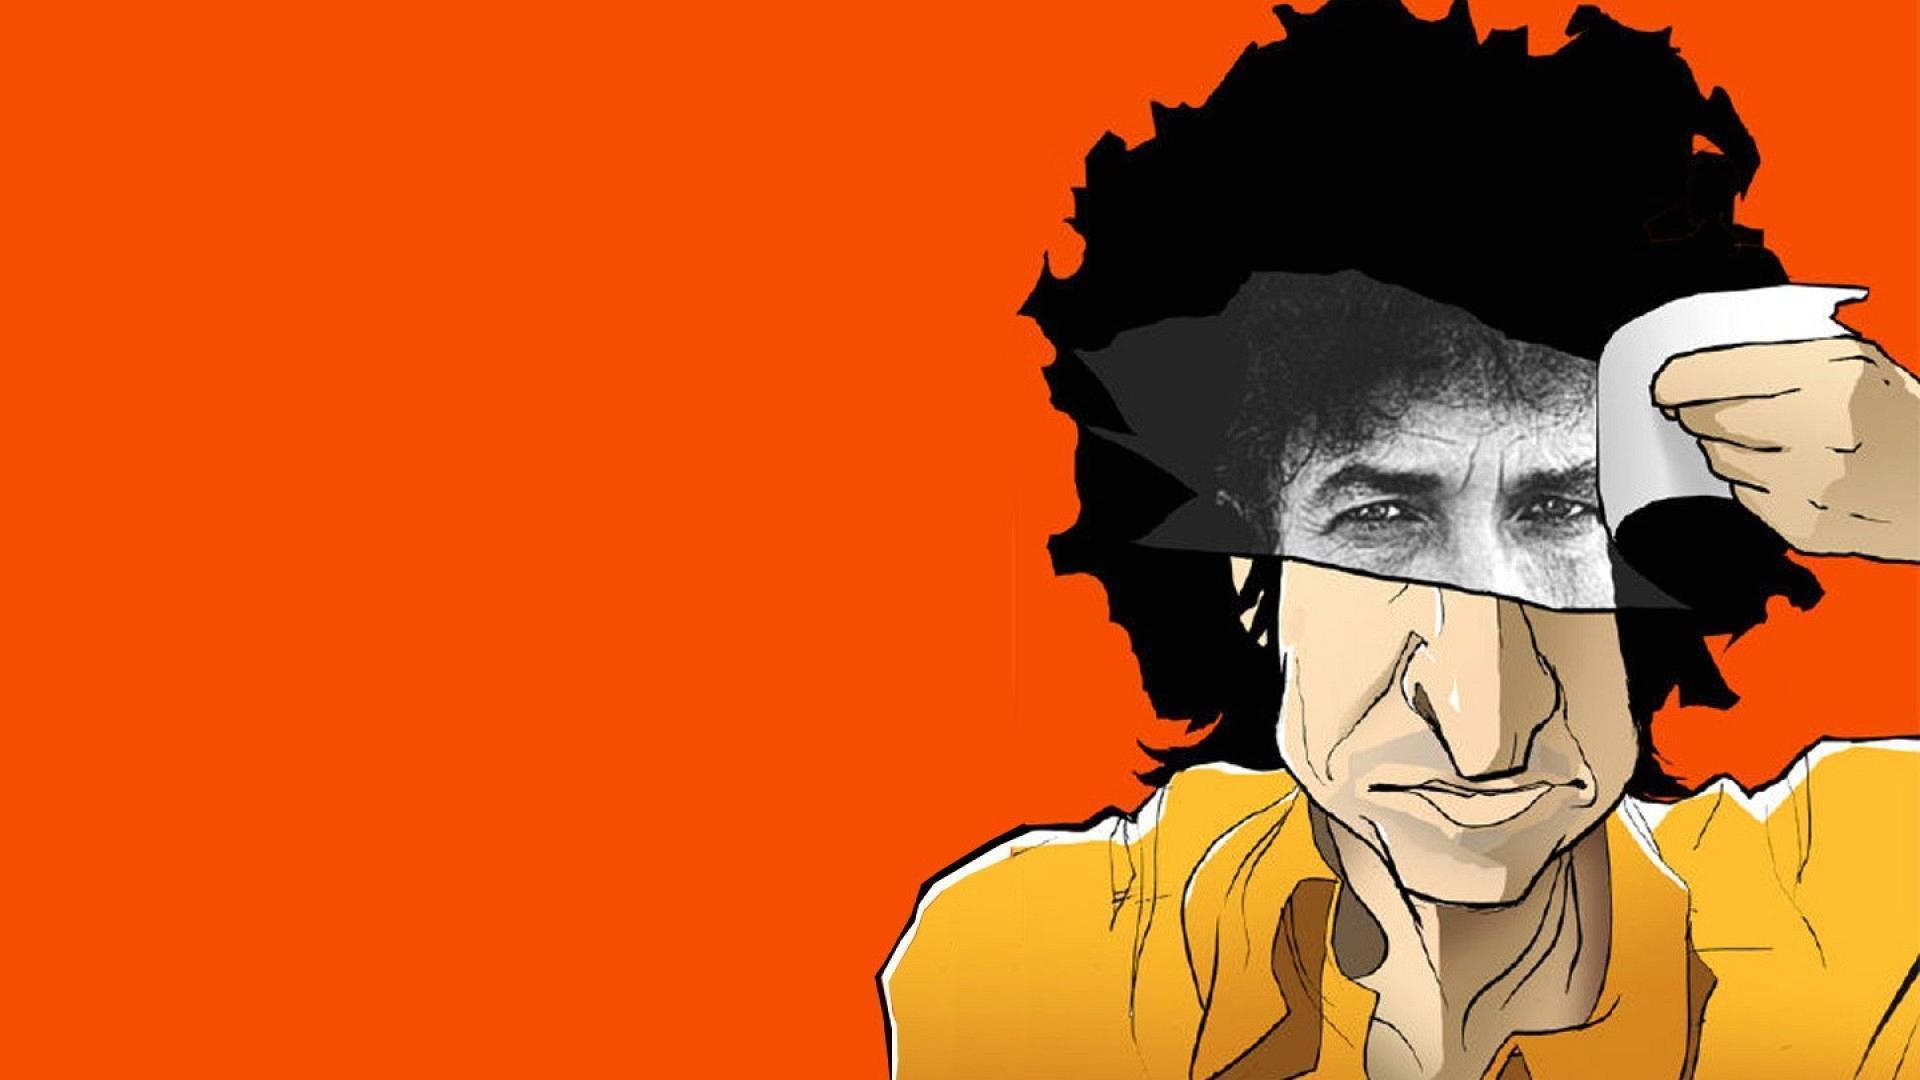 Wallpaper Funny Bob Dylan Caricature x 1080 Funny